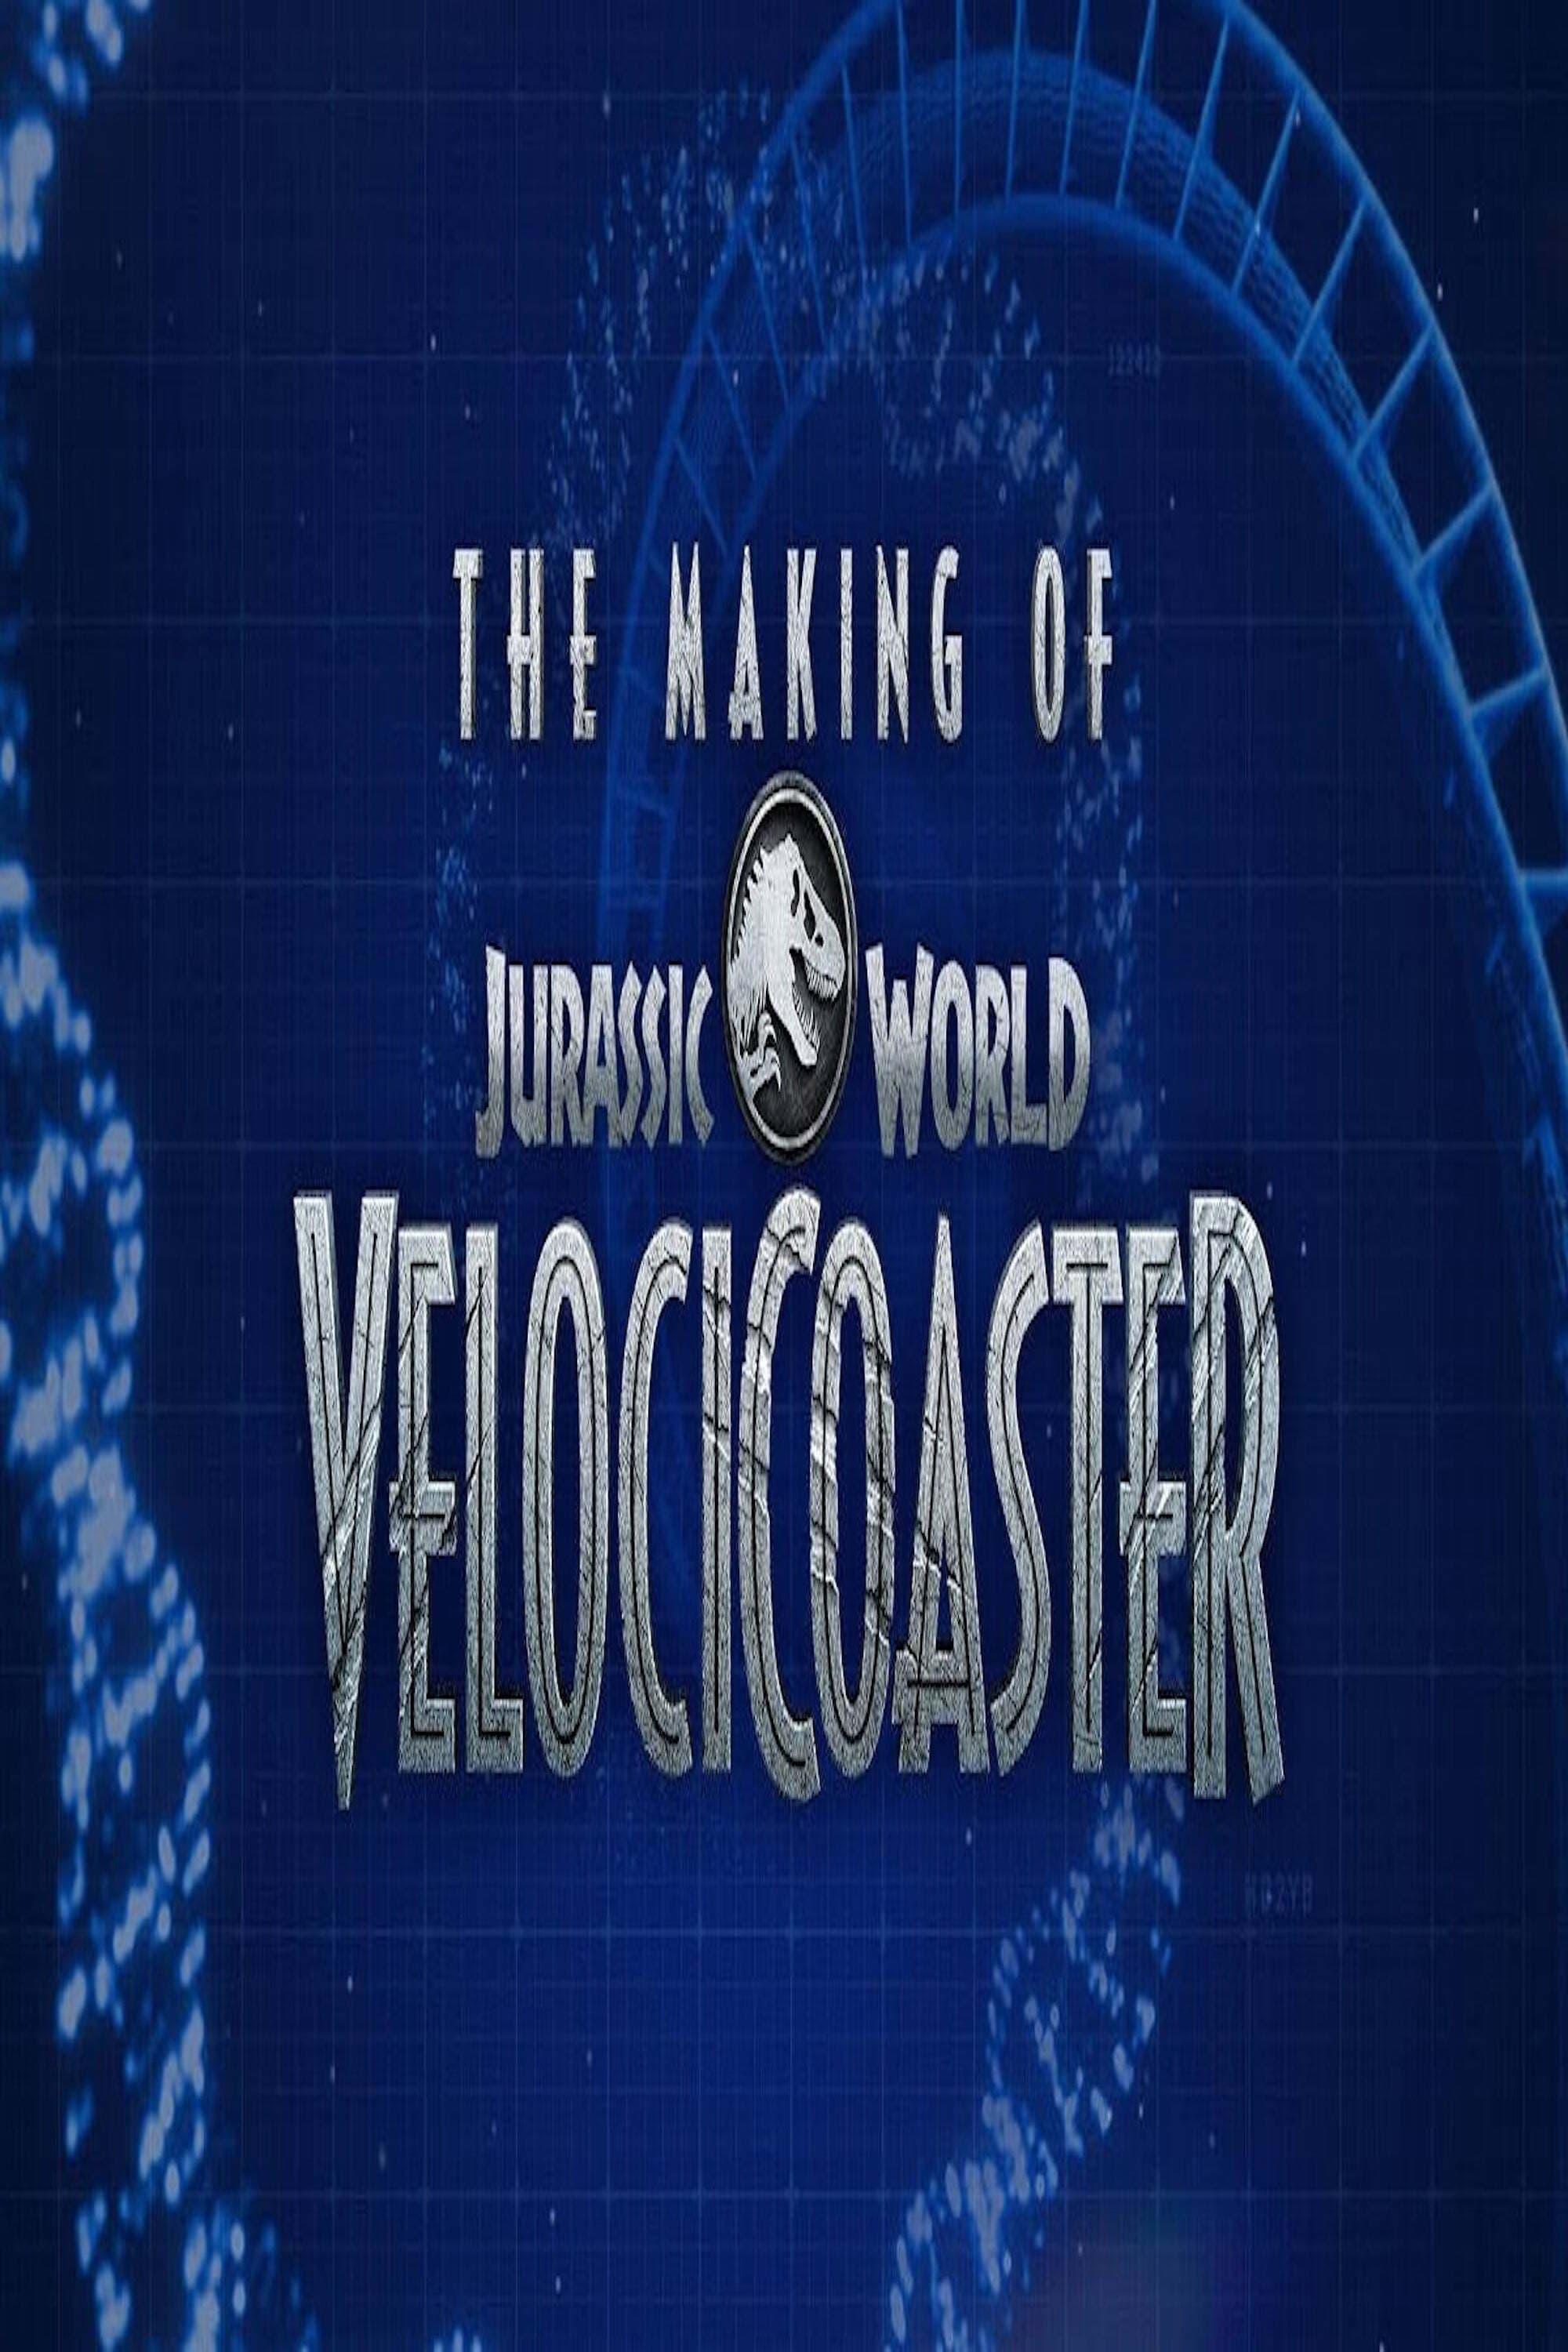 The Making of Jurassic World VelociCoaster poster